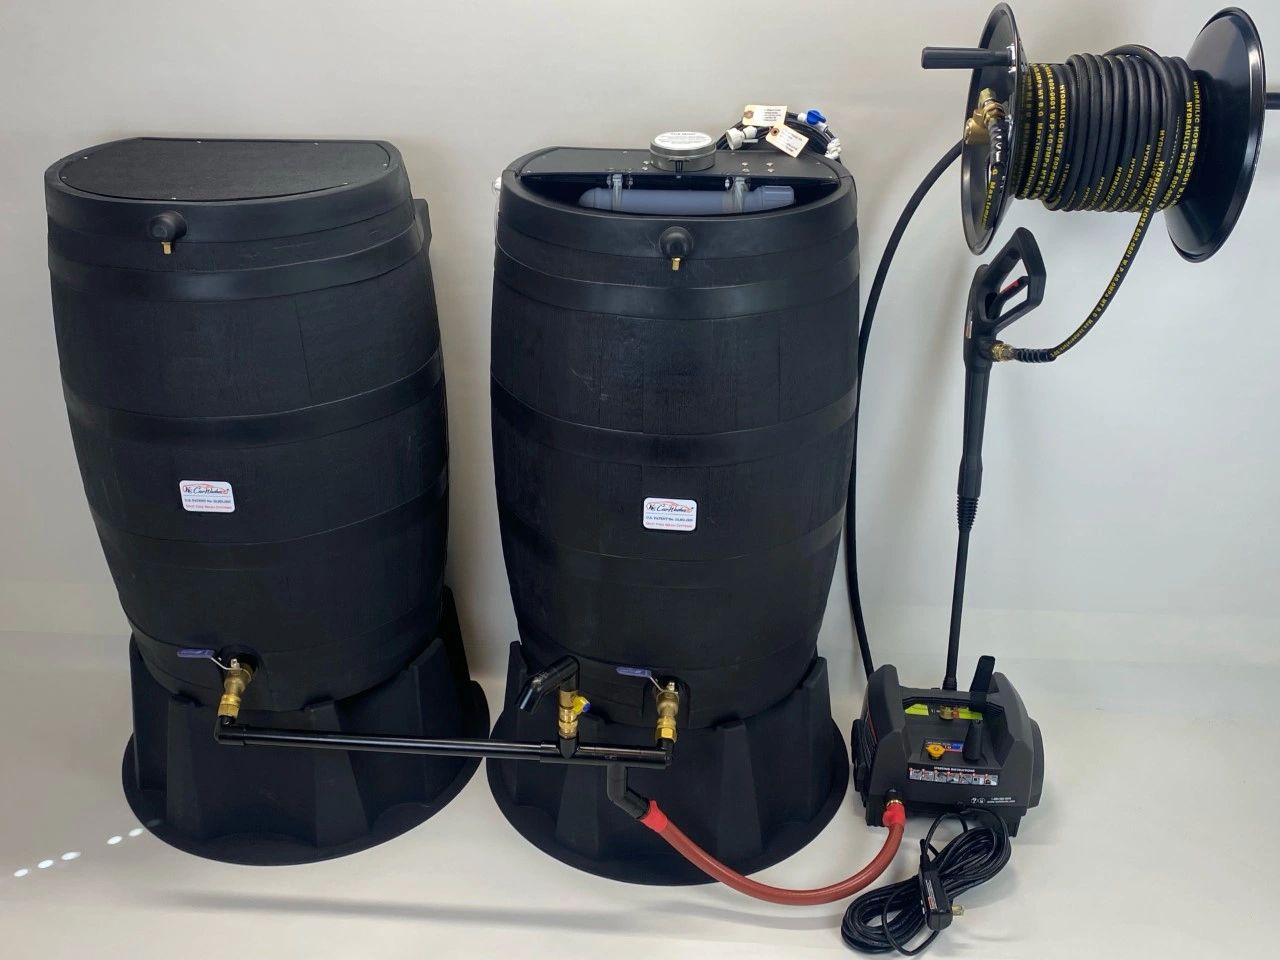 DI-120 Cr Spotless Water System  Car wash equipment, Water systems, Dry car  wash